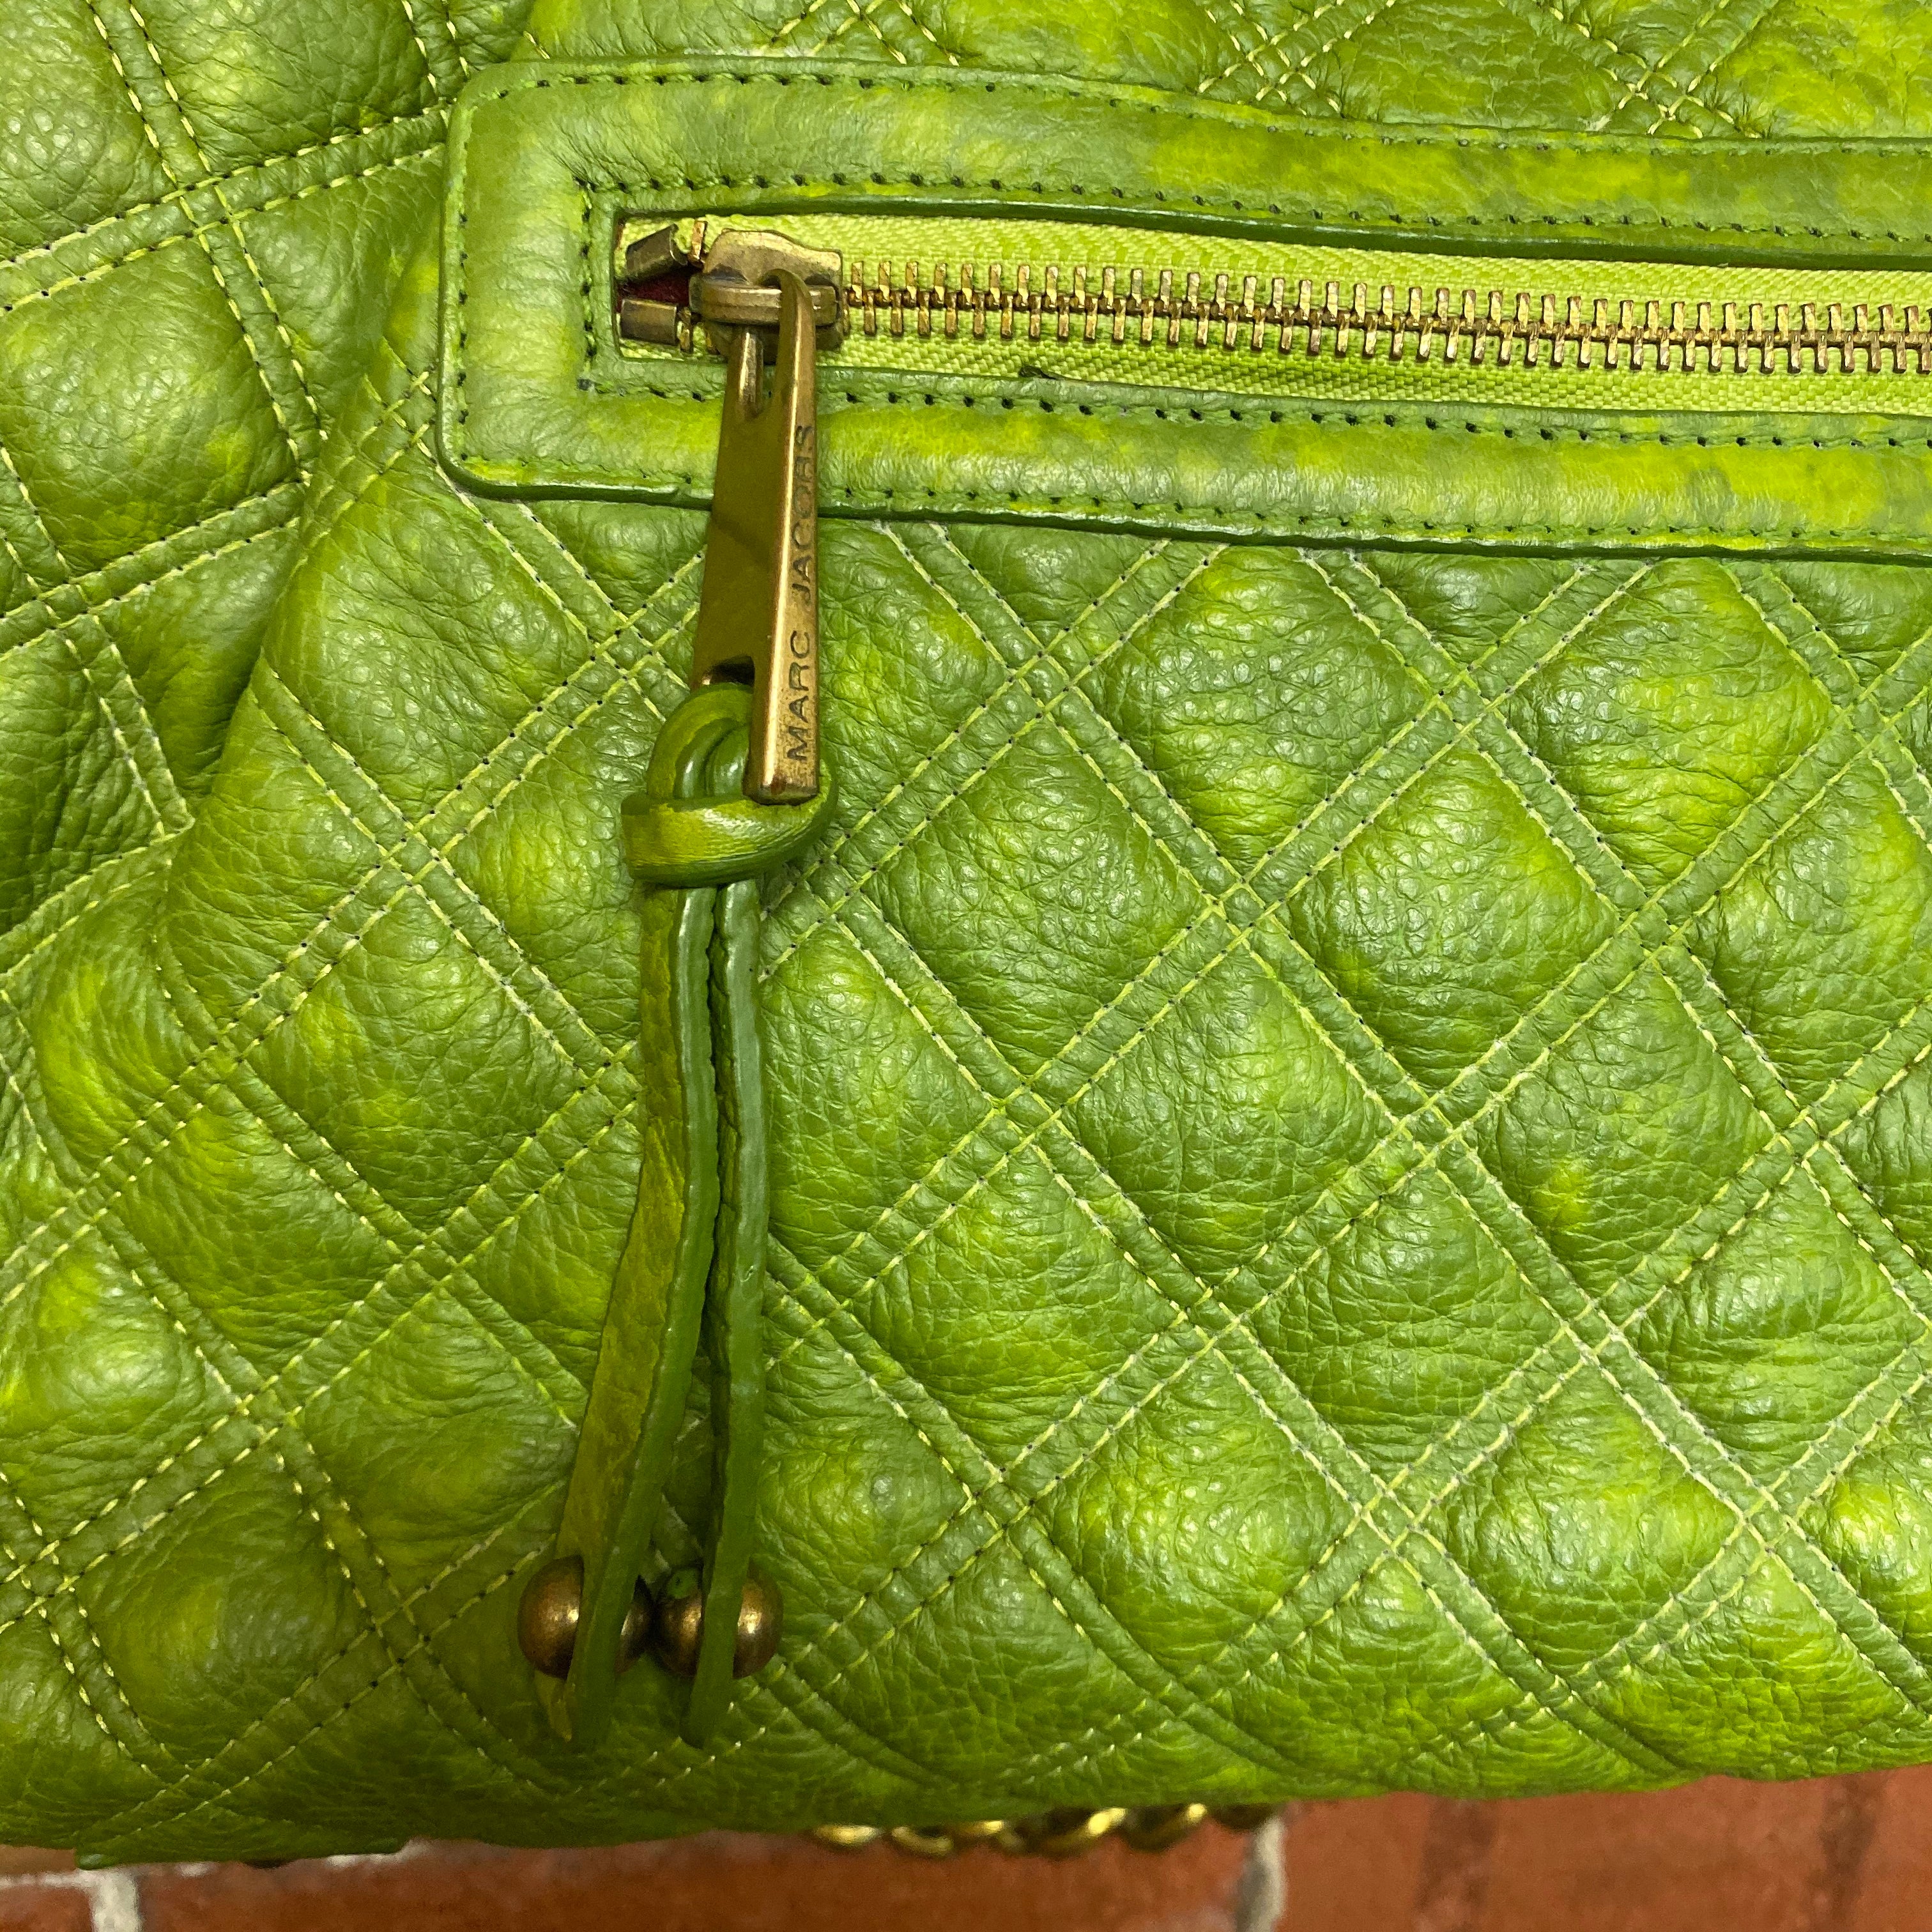 MARC JACOBS quilted leather handbag